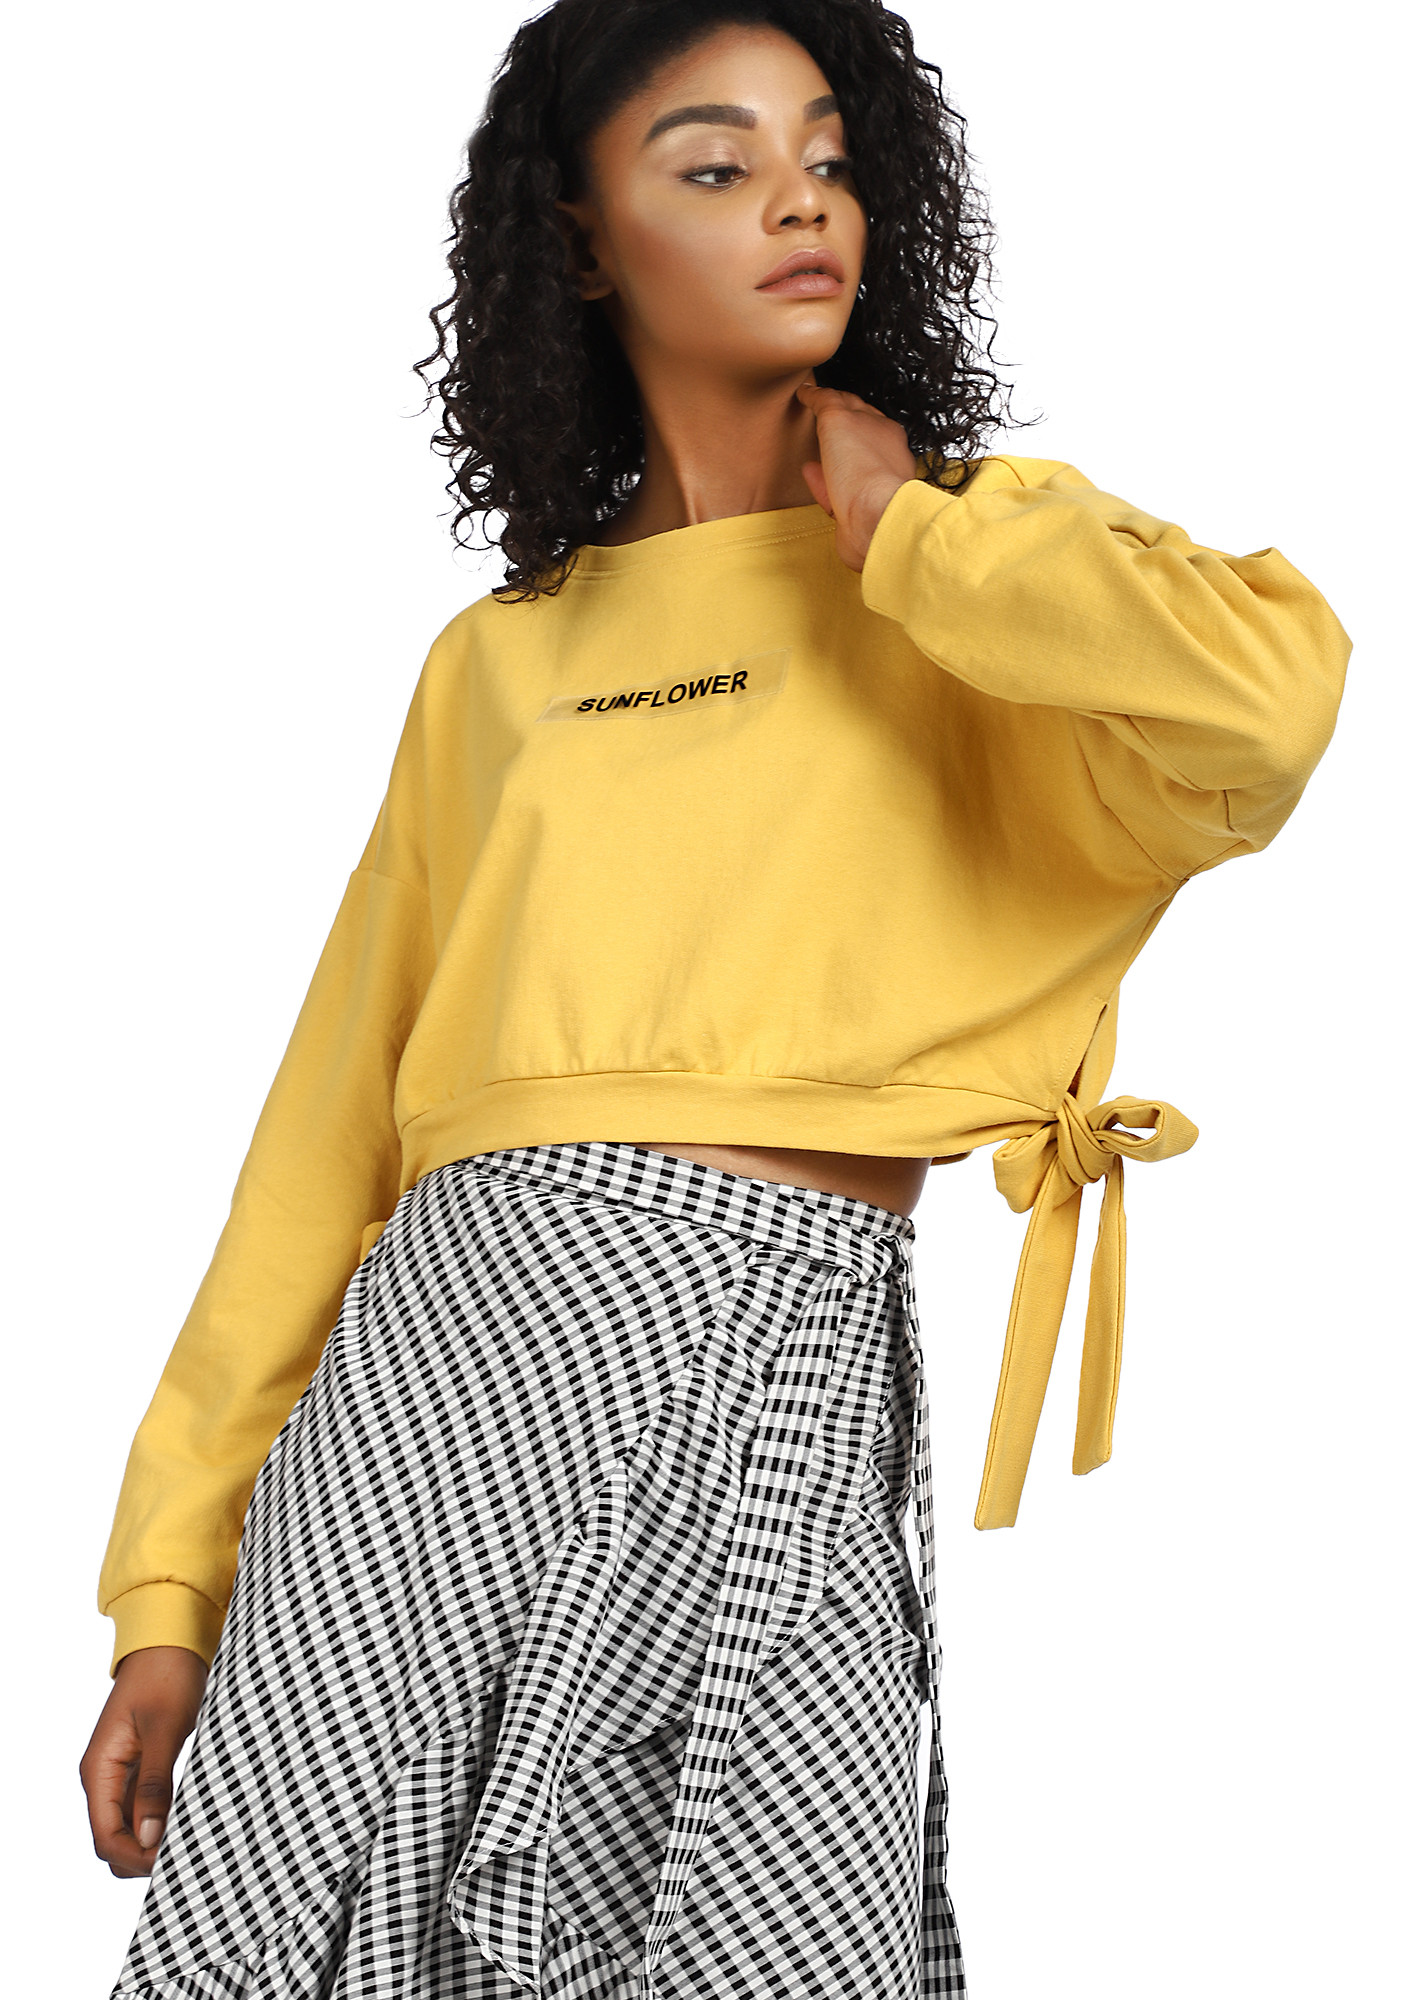 SUNFLOWER AND KISSES YELLOW CROP PULLOVER